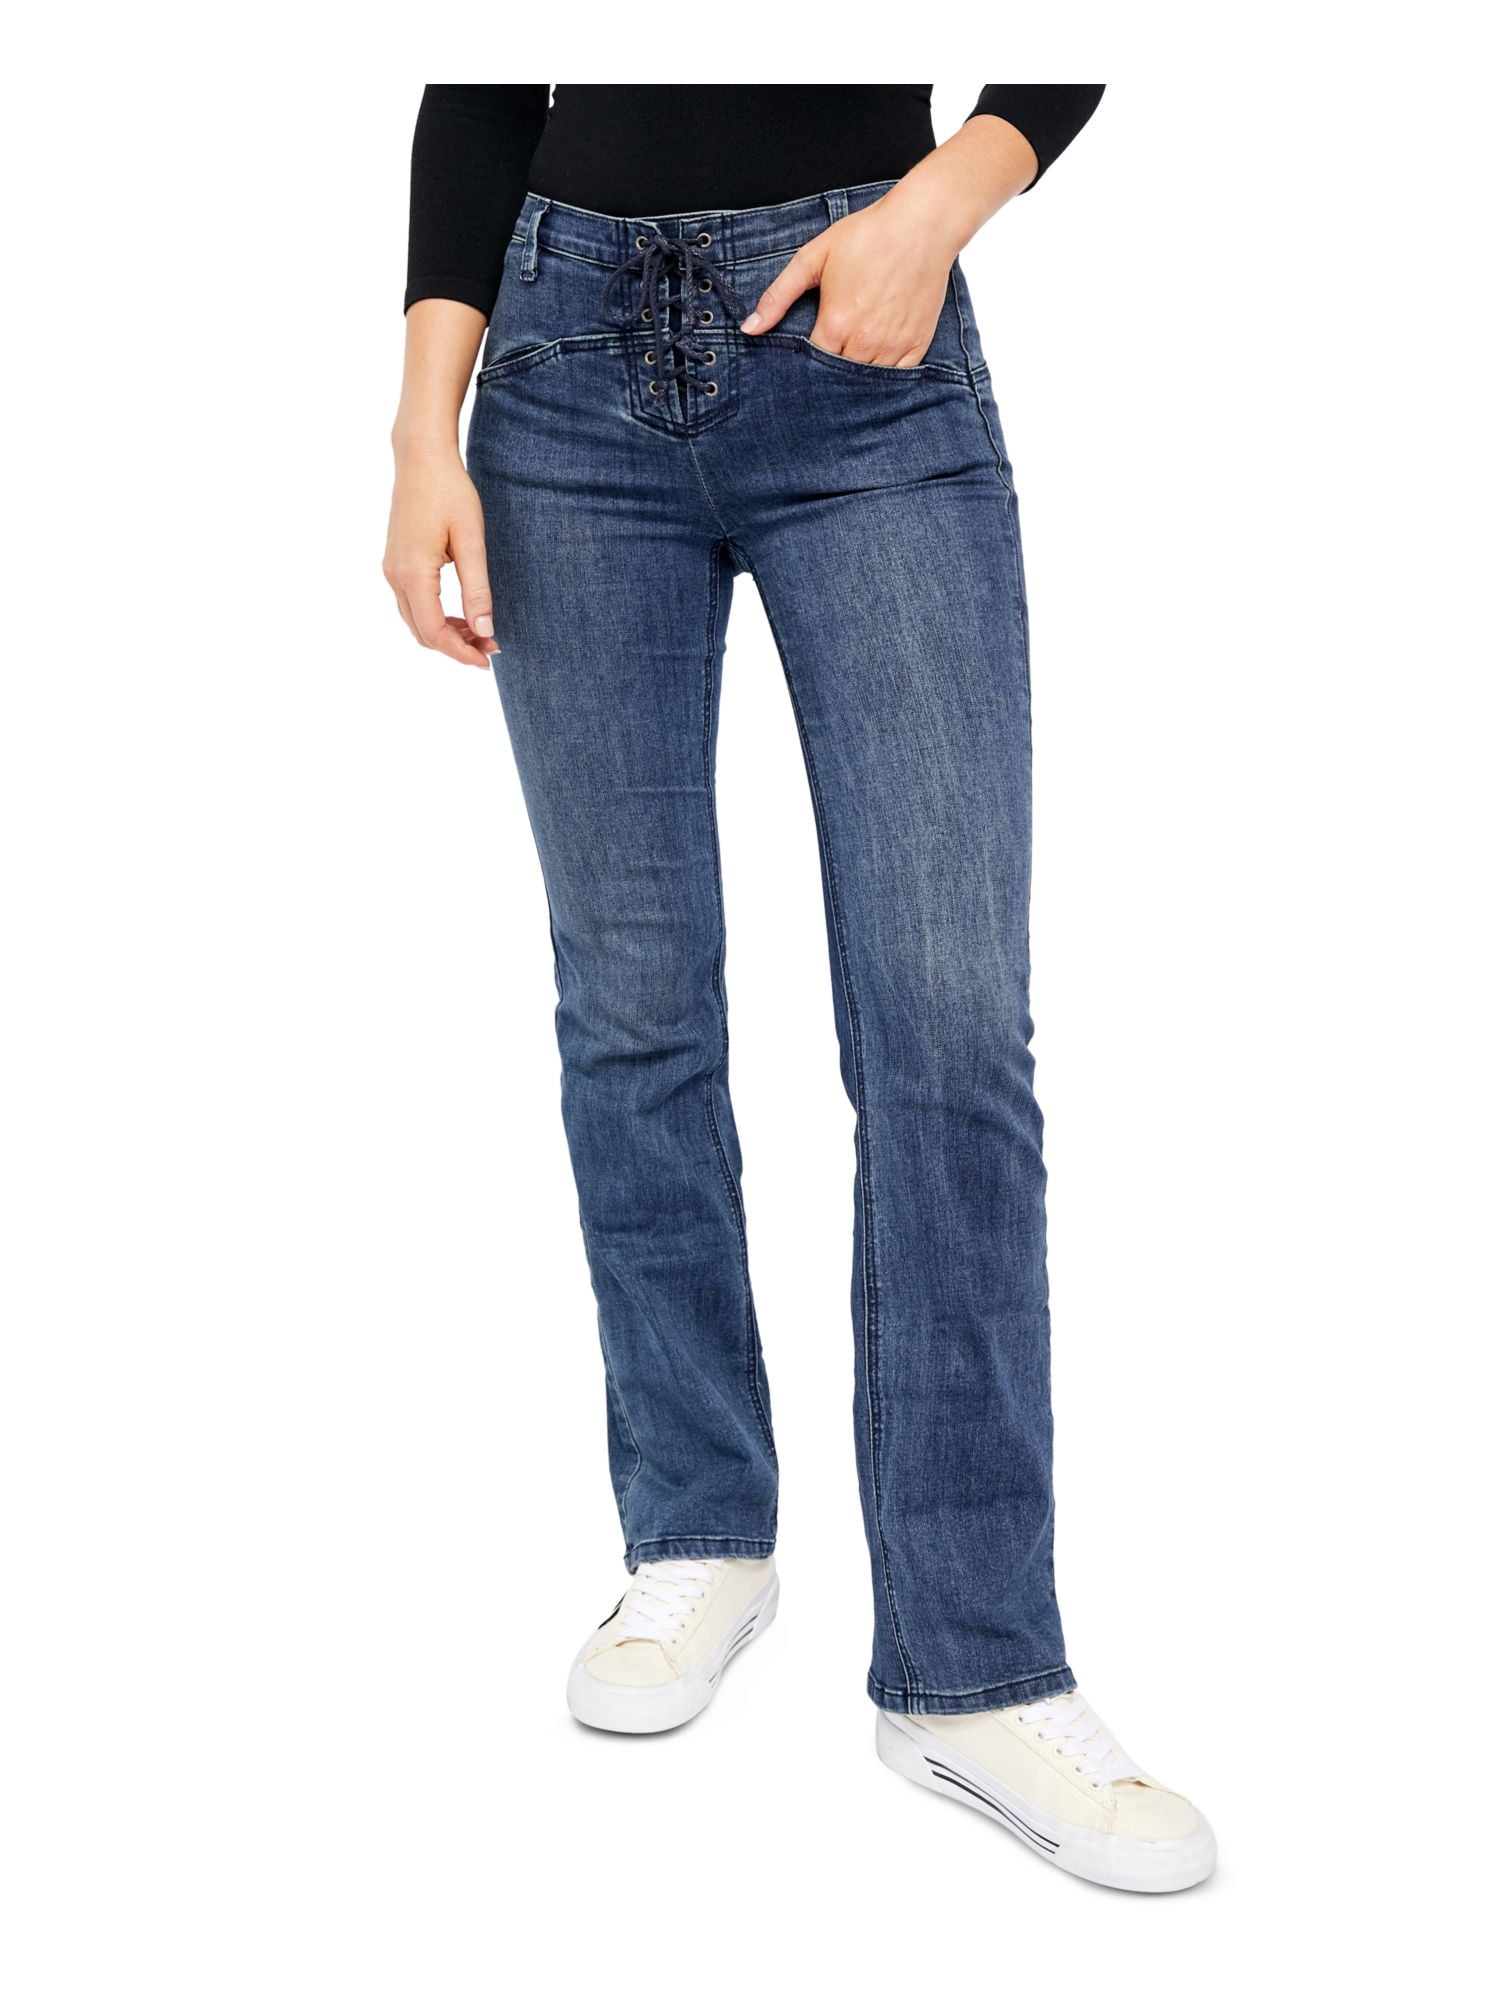 what is a womens 27 in jeans